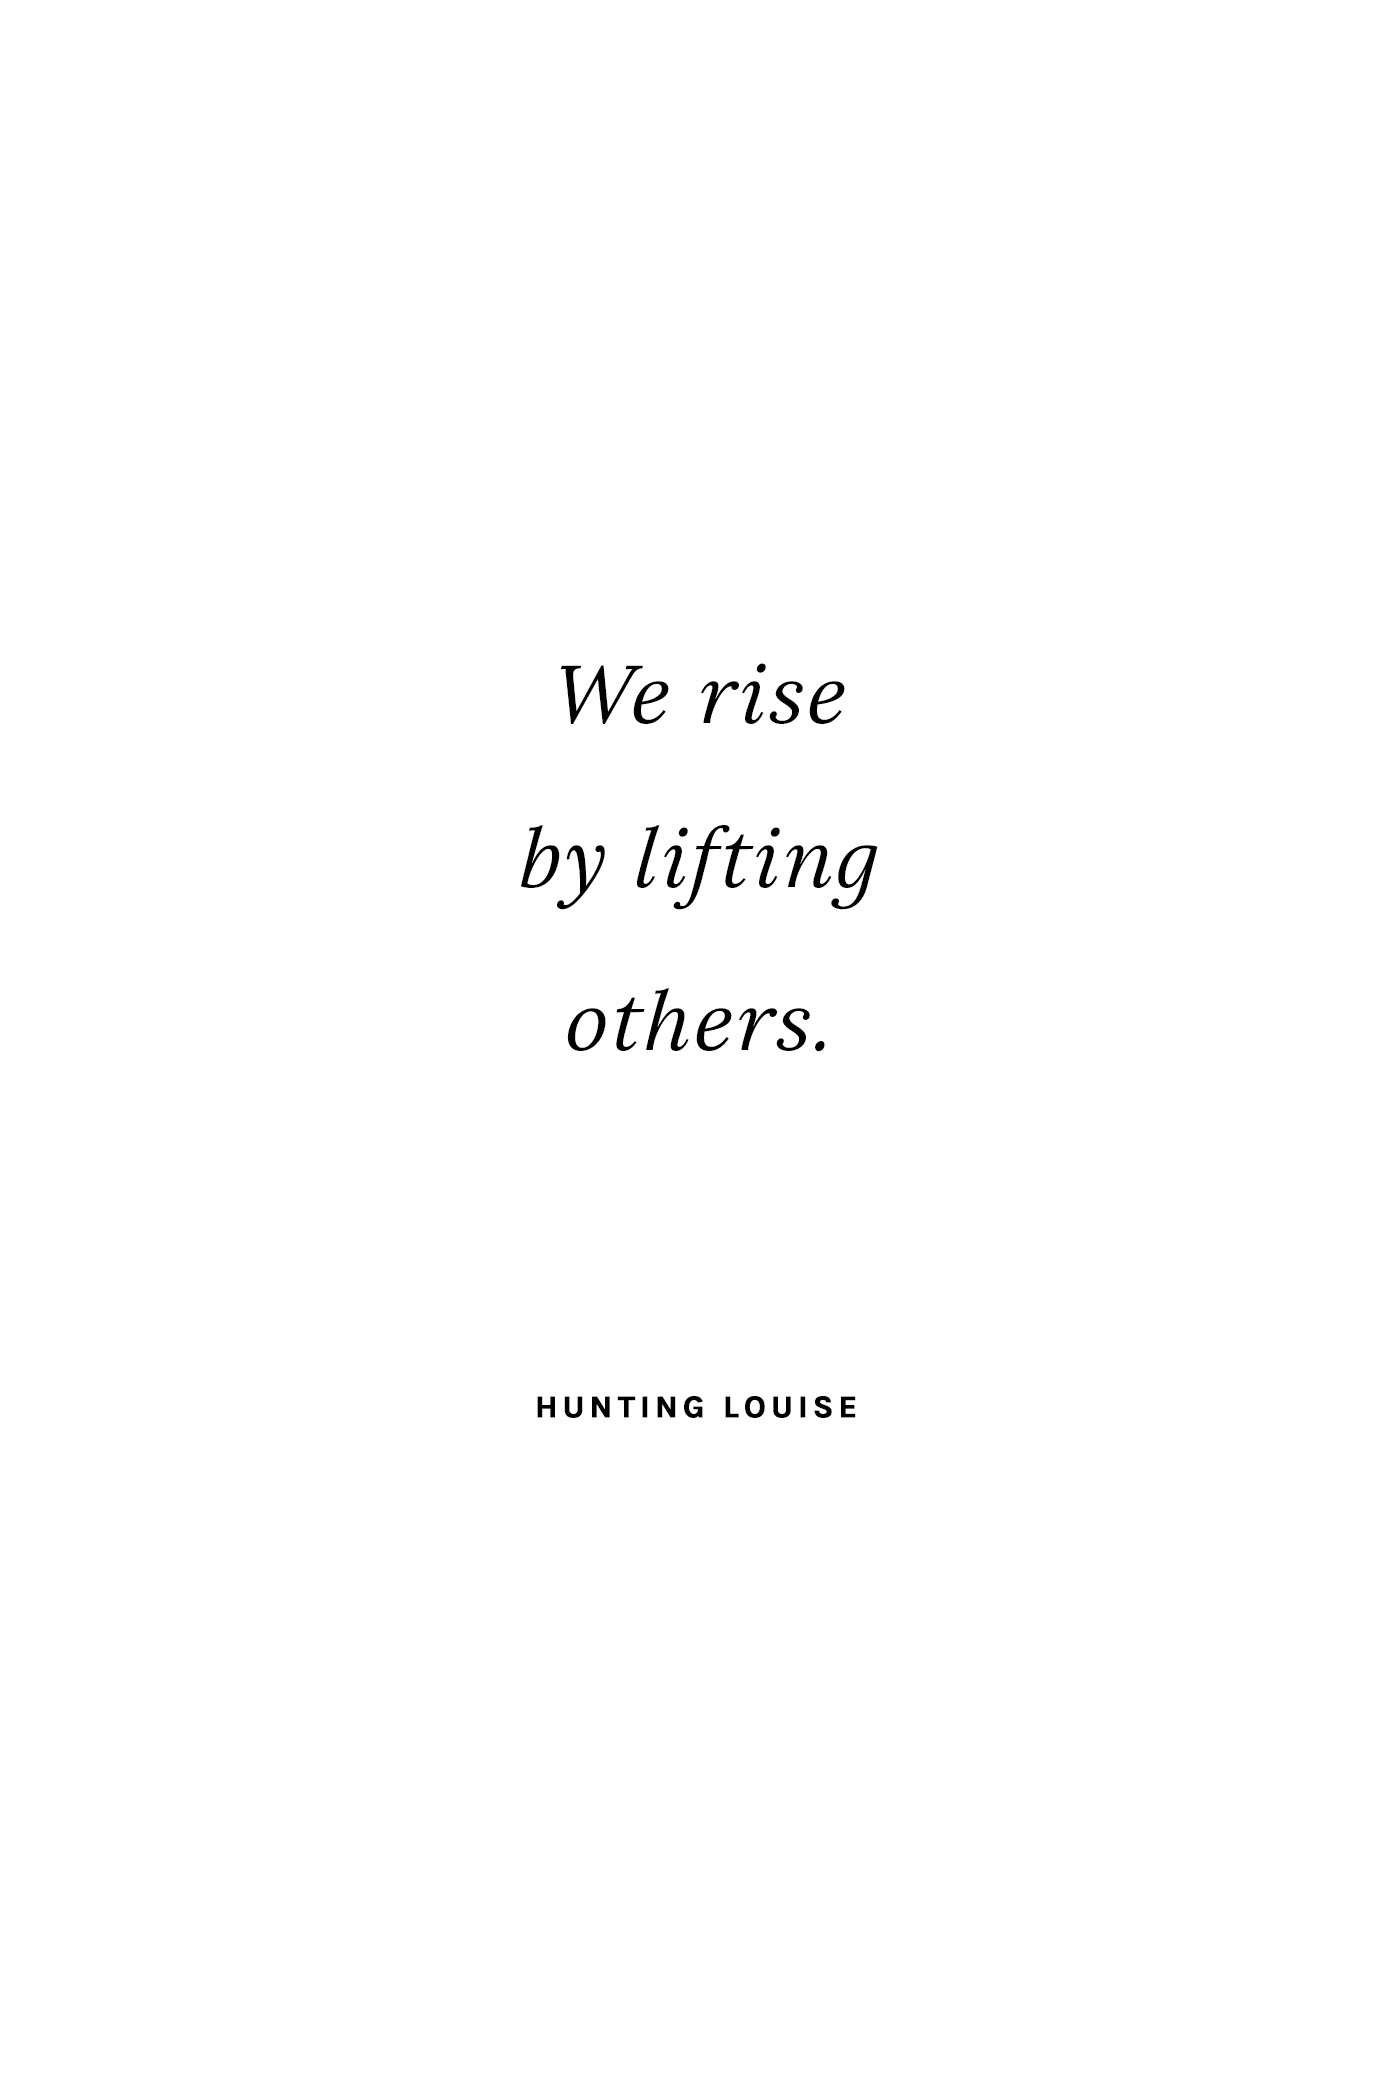 "We rise by lifting others." - Hunting Louise - 5 Inspiring Quotes for a Positive Lifestyle on Hej Doll